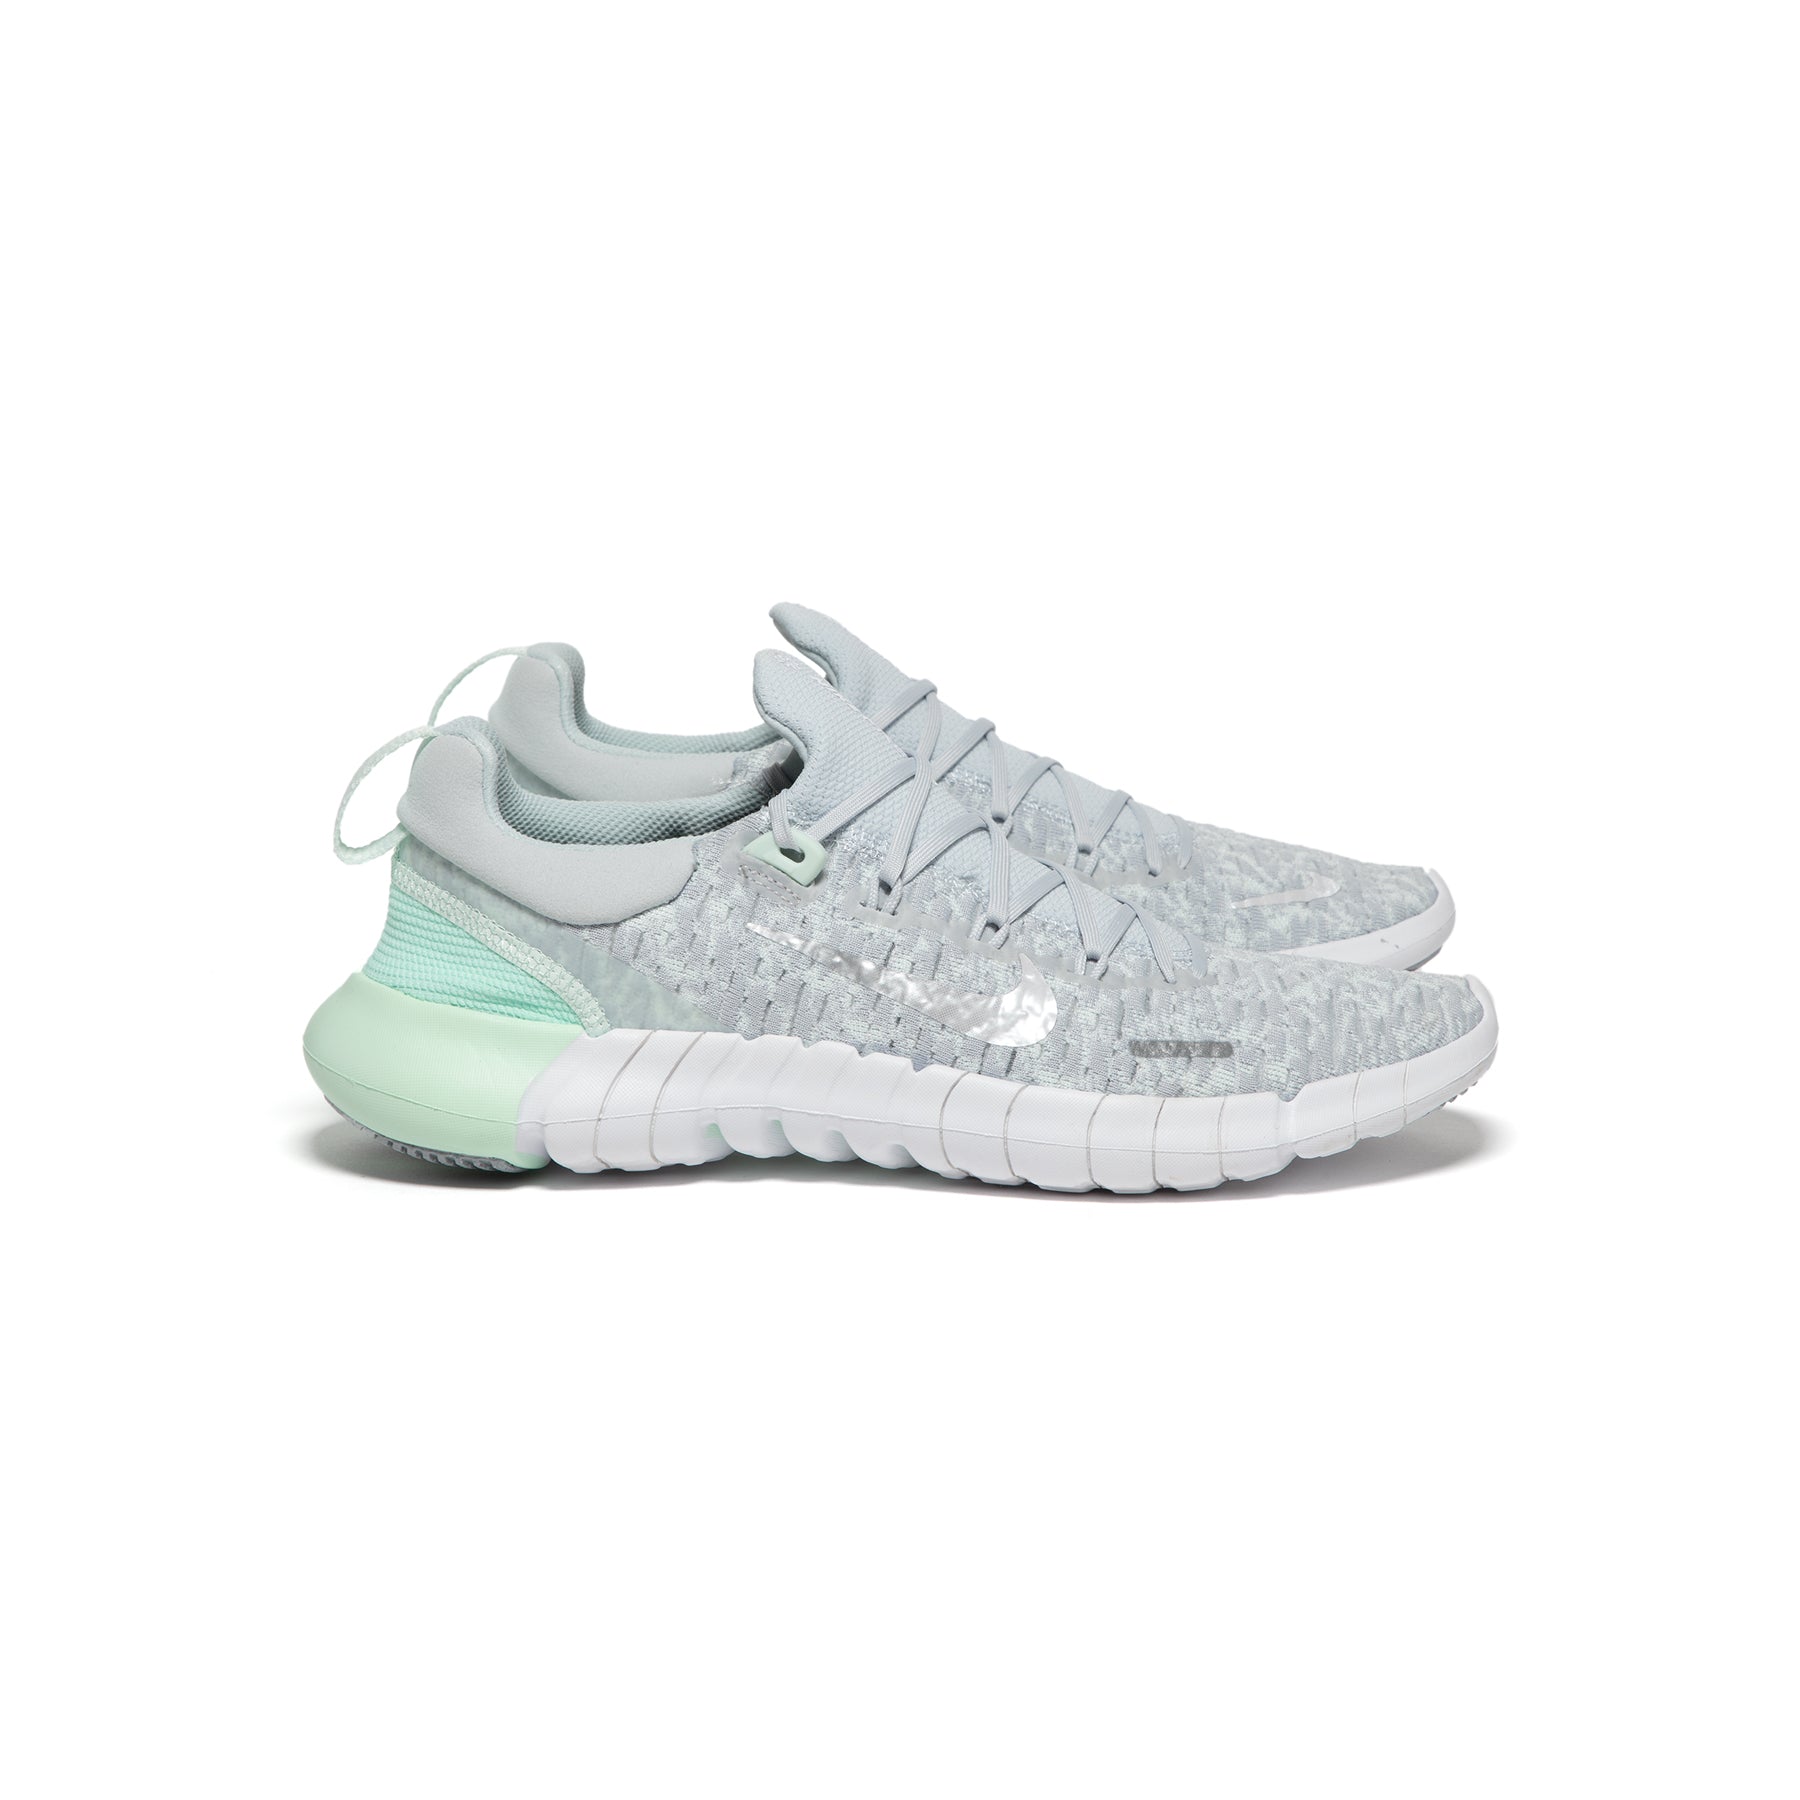 Nike Free 5.0 (Pure Platinum/White/Barely Green) – Concepts